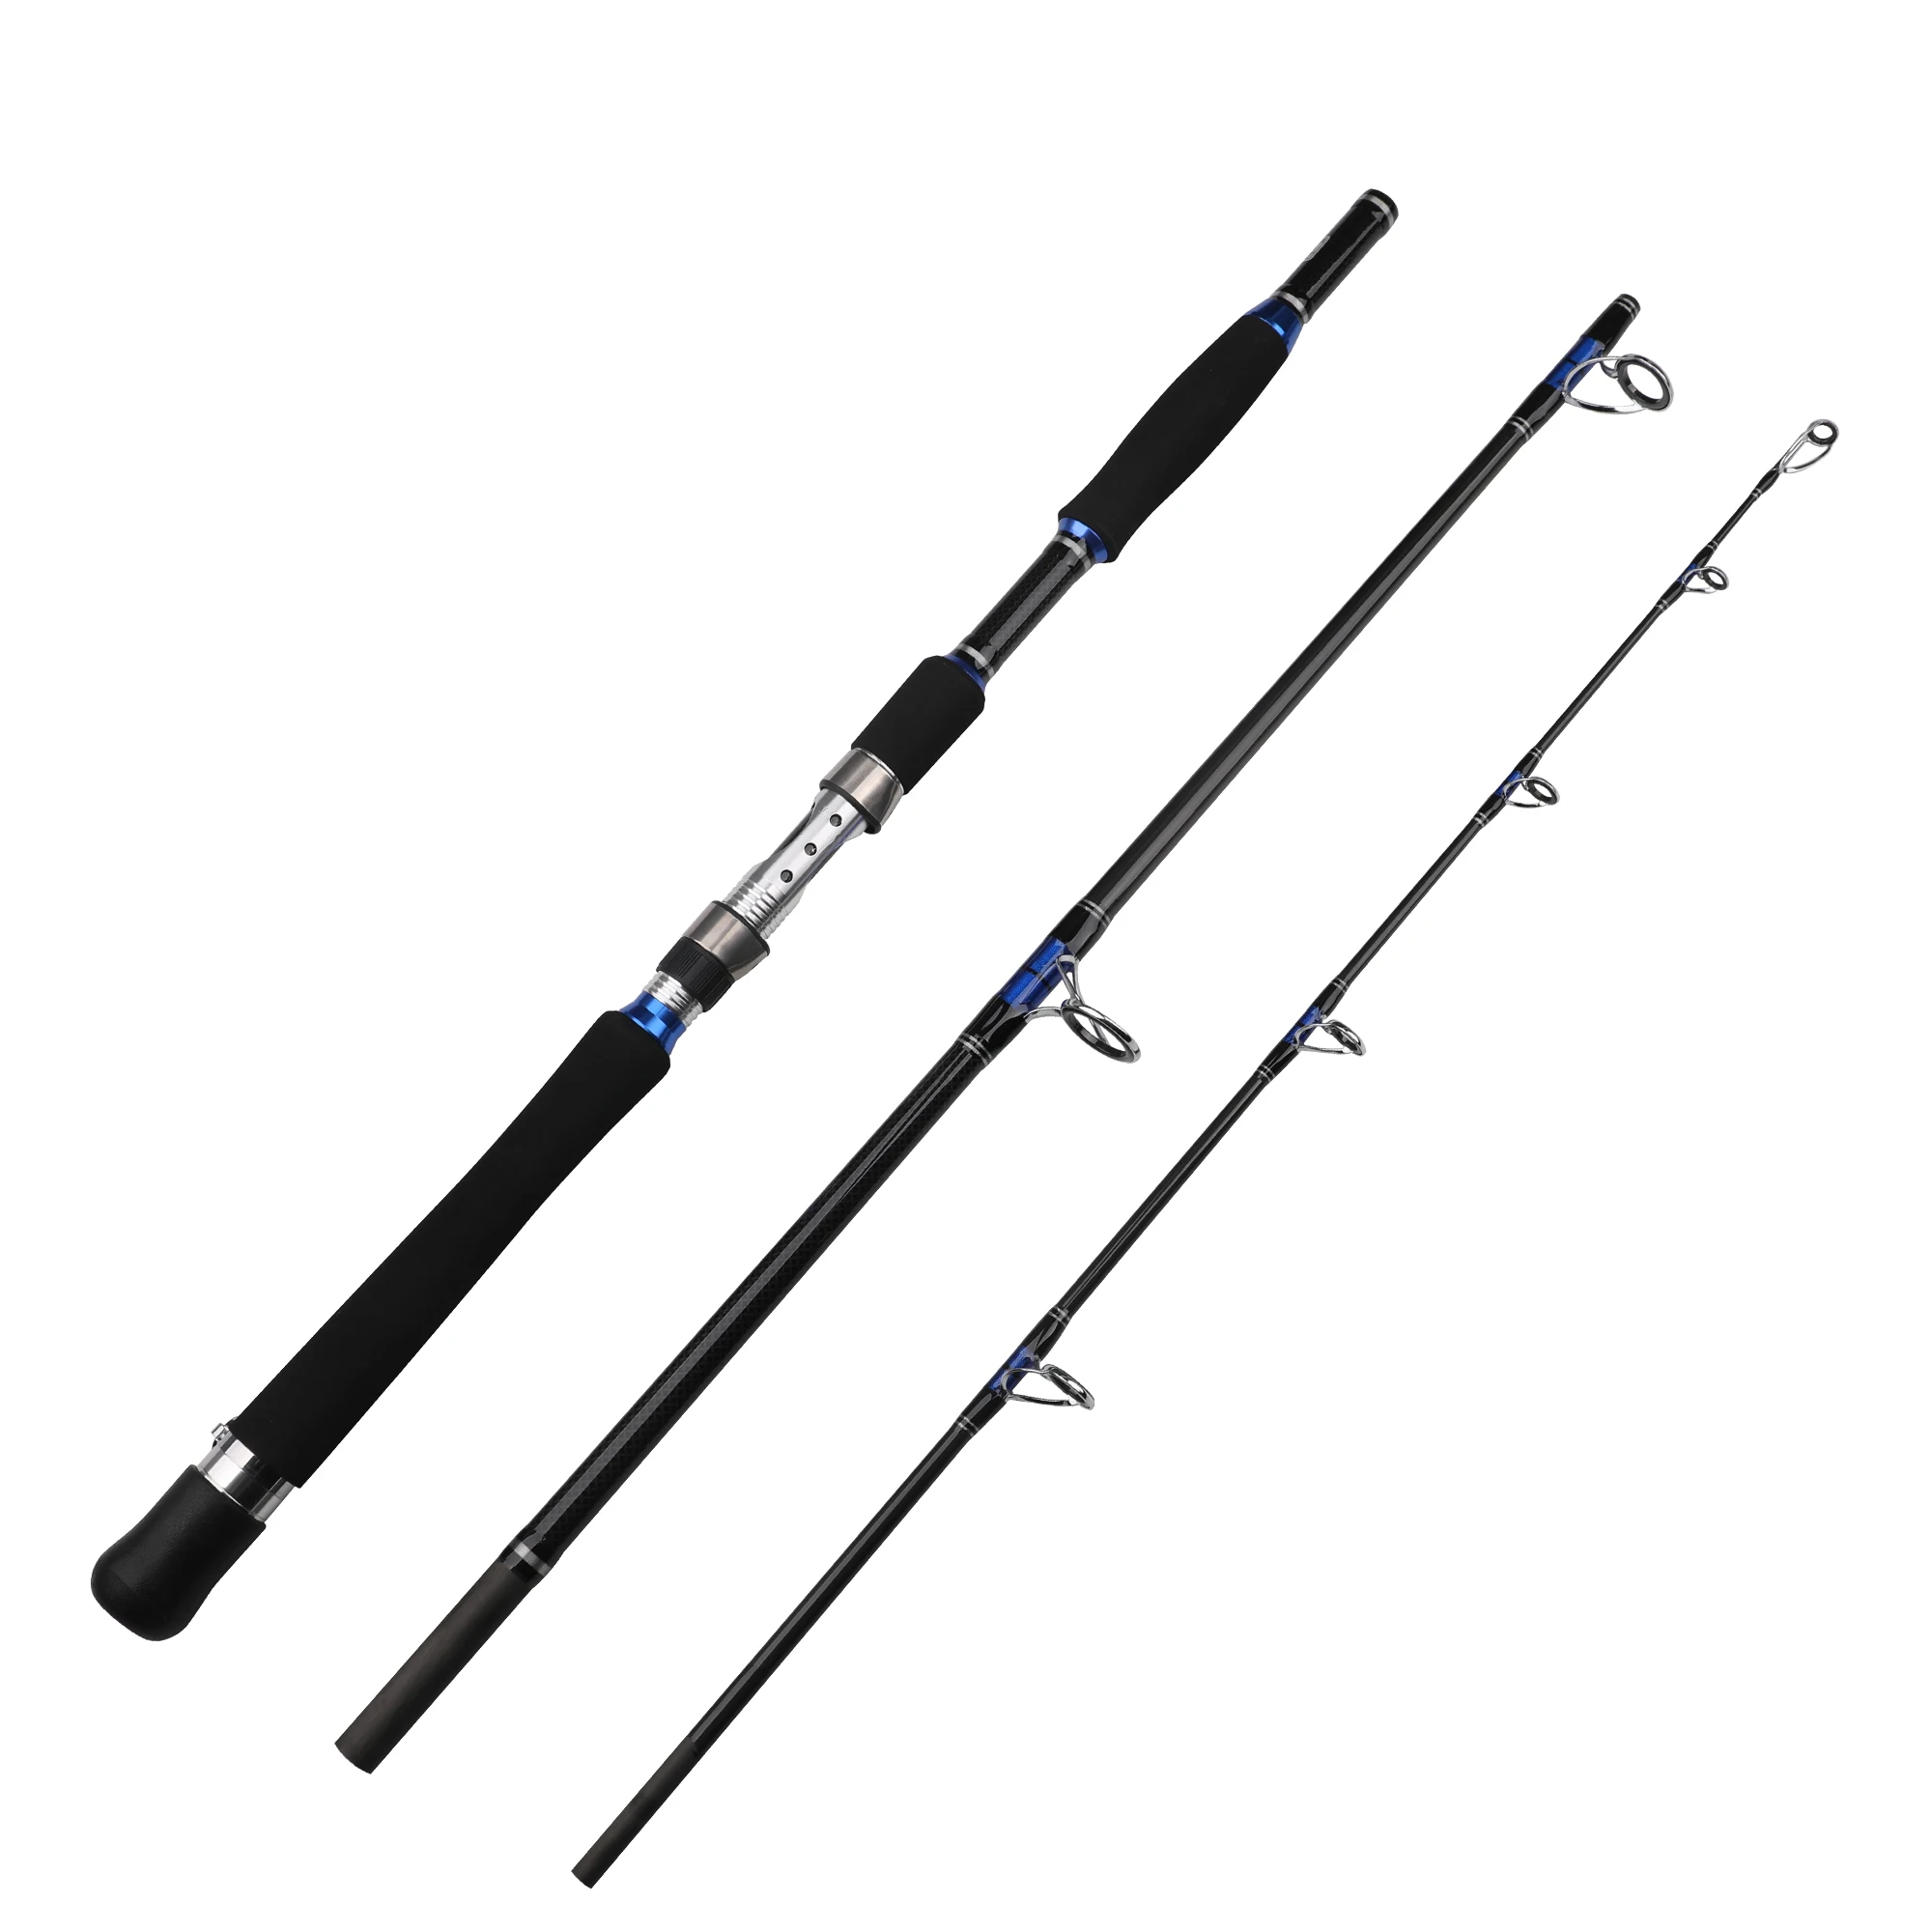 PHISHGER Jigging Sea Boat Fishing Rod 1.8/1.95/2.1m Carbon Fiber Big Game H Line 50Lbs Lure Weight 70-250g Spinning Casting Pole